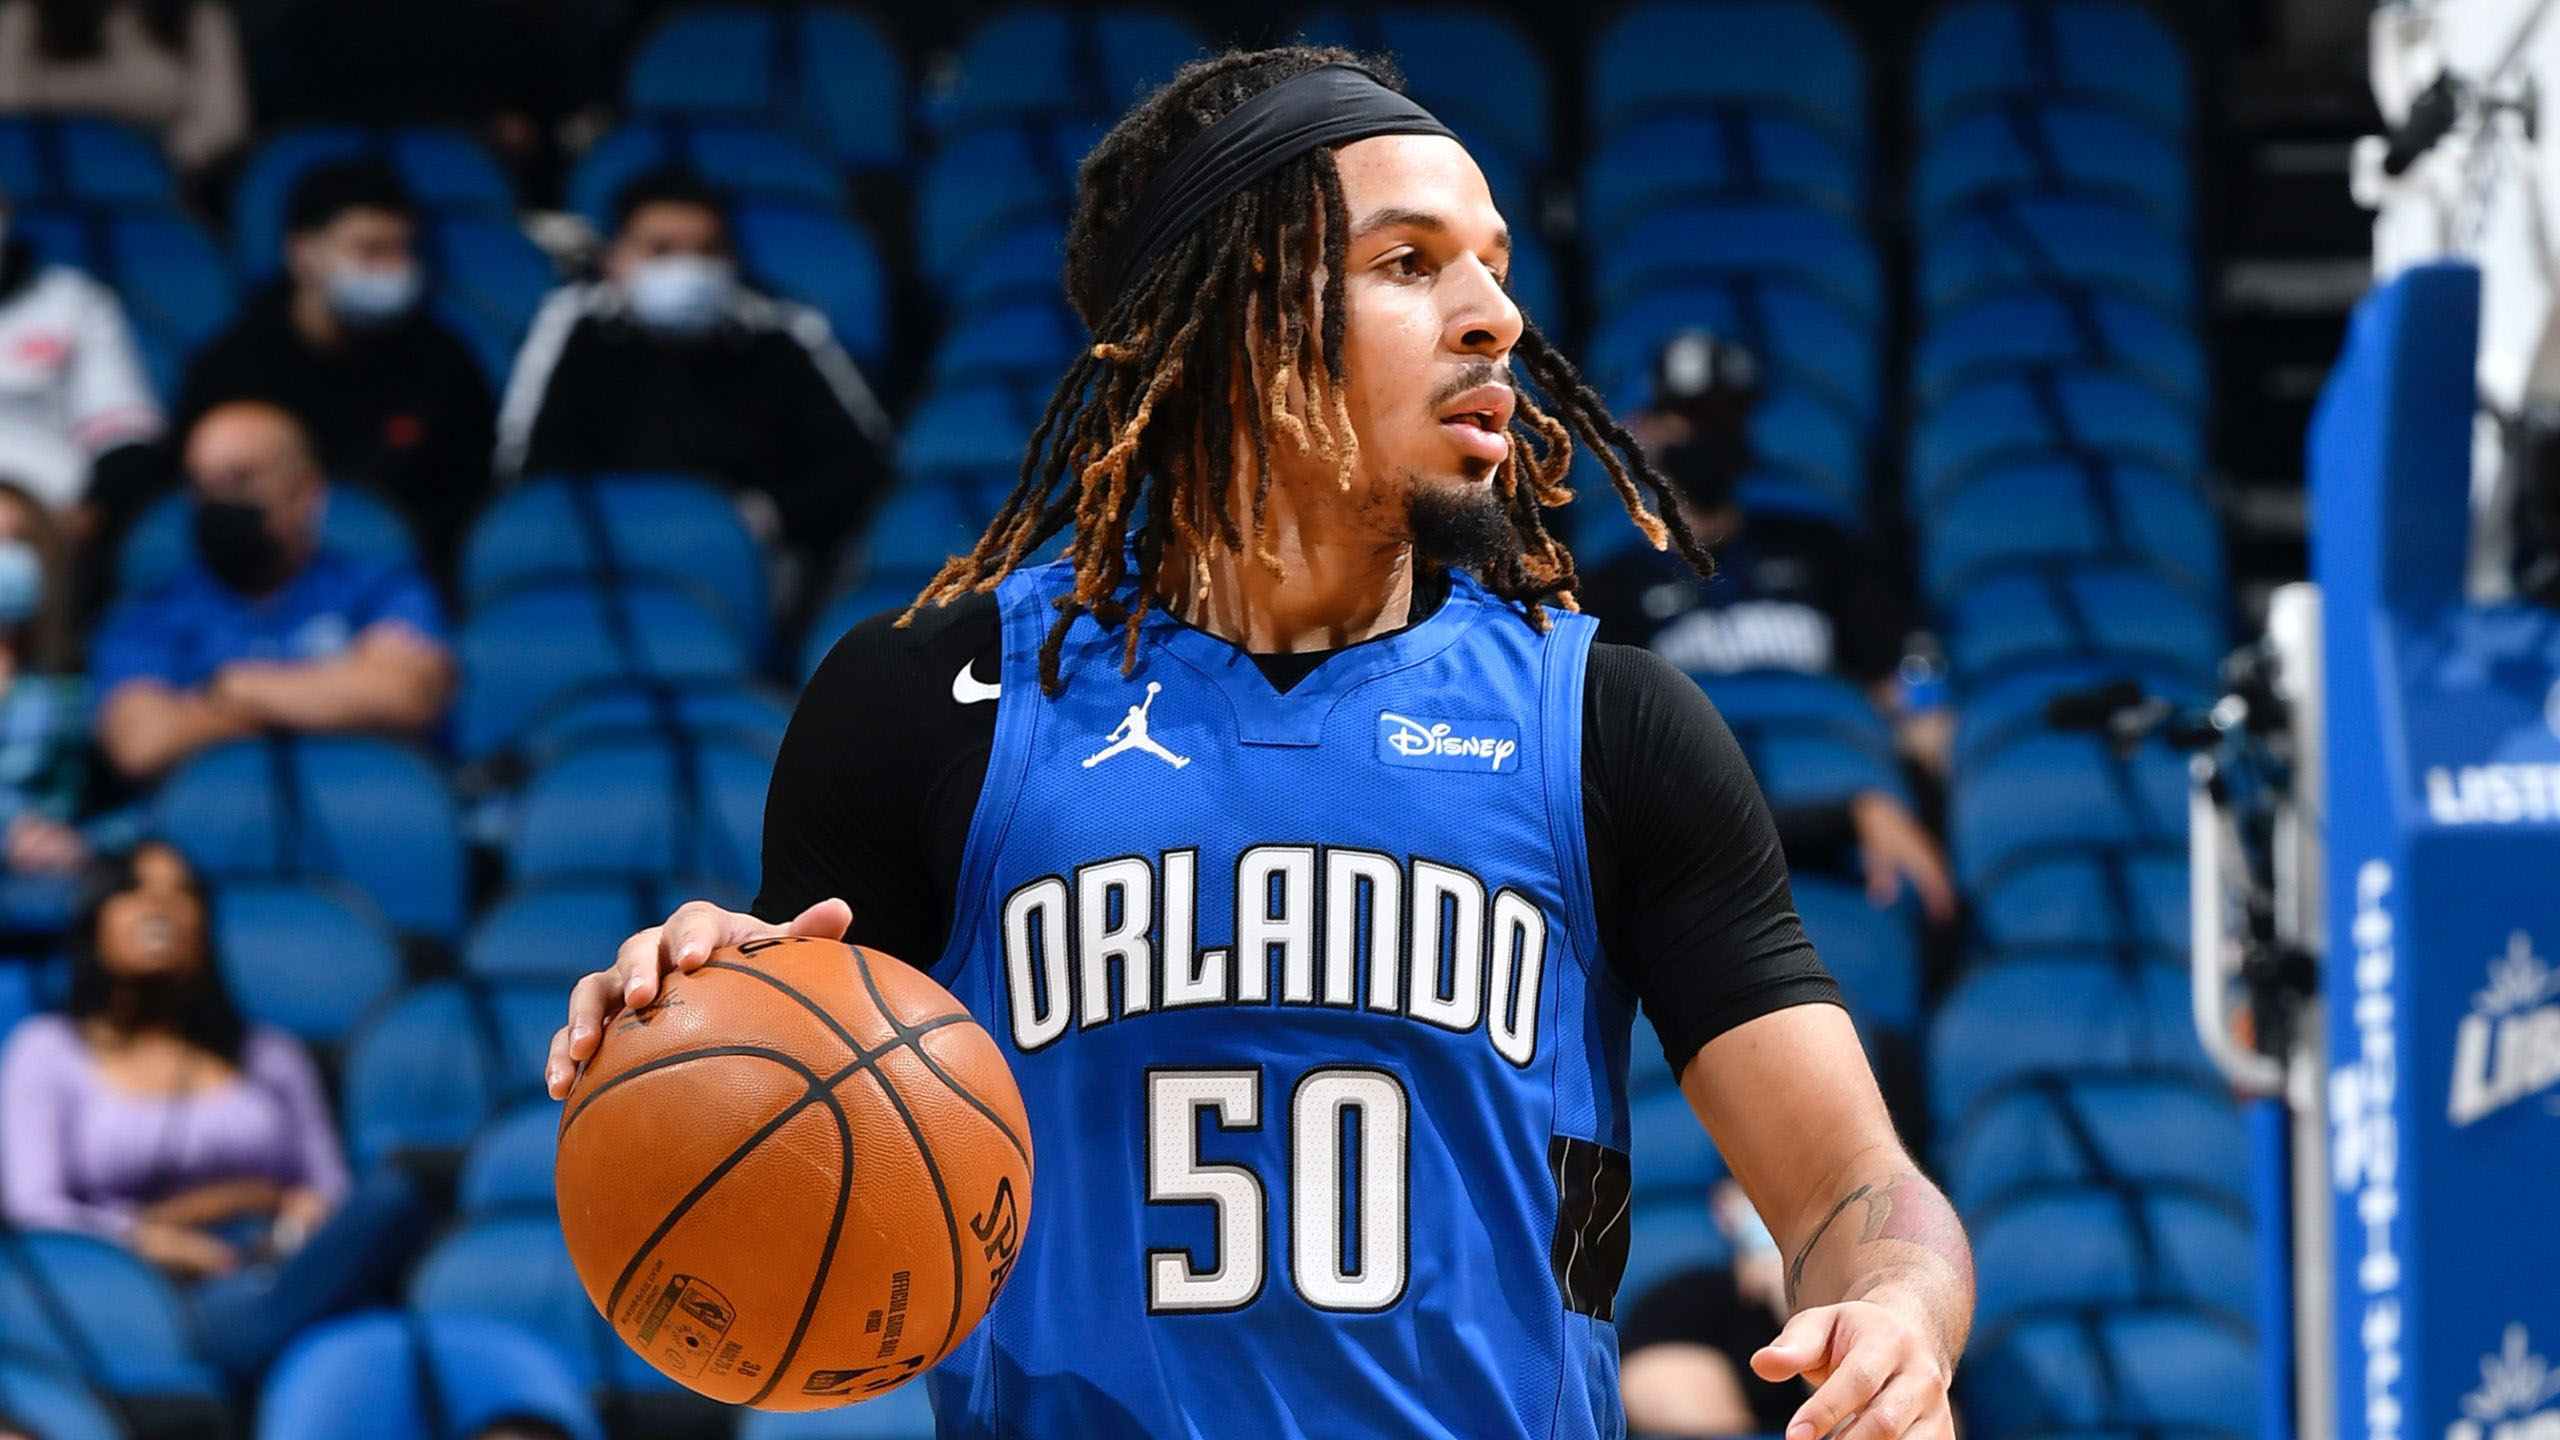 Cole Hinton Anthony (born May 15, 2000) is an American professional basketball player for the Orlando Magic of the Natio...